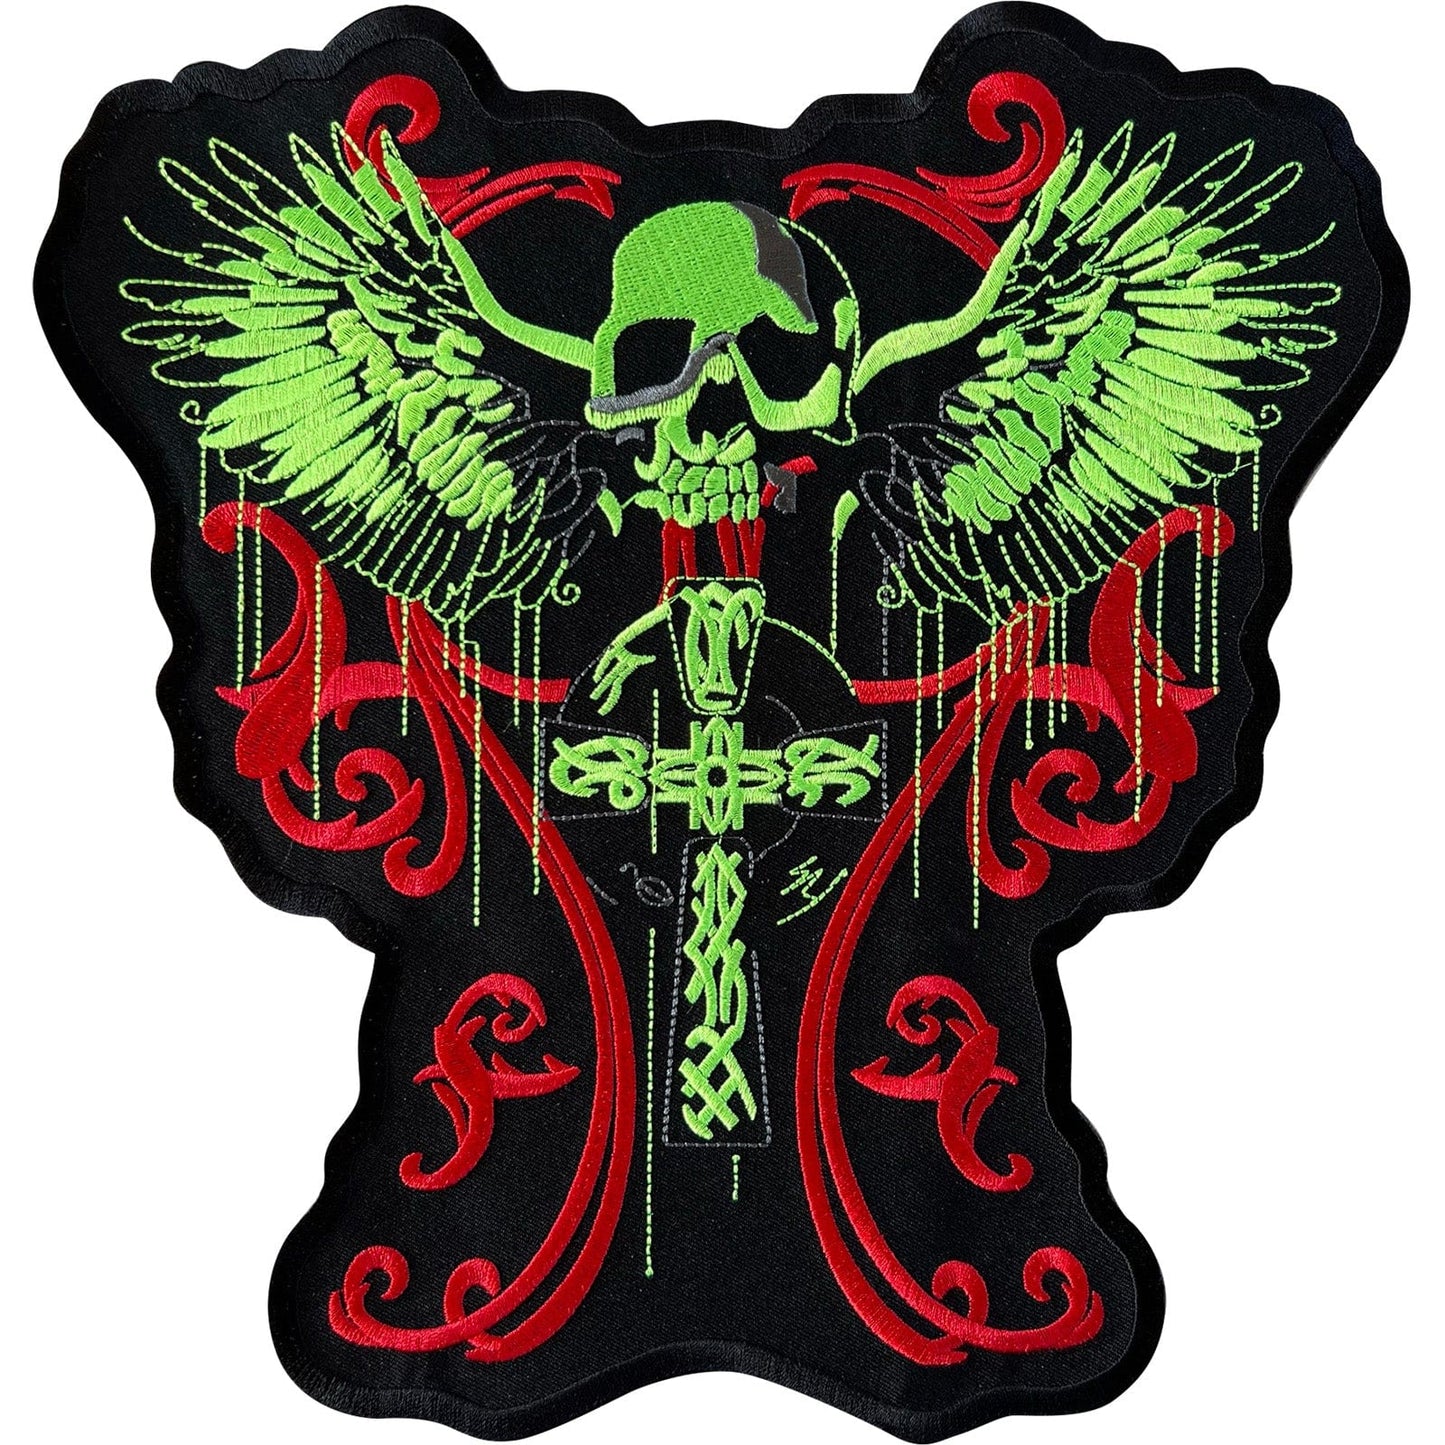 Big Large Iron On Sew On Jacket Patch Skull Cross Angel Wings Embroidered Badge